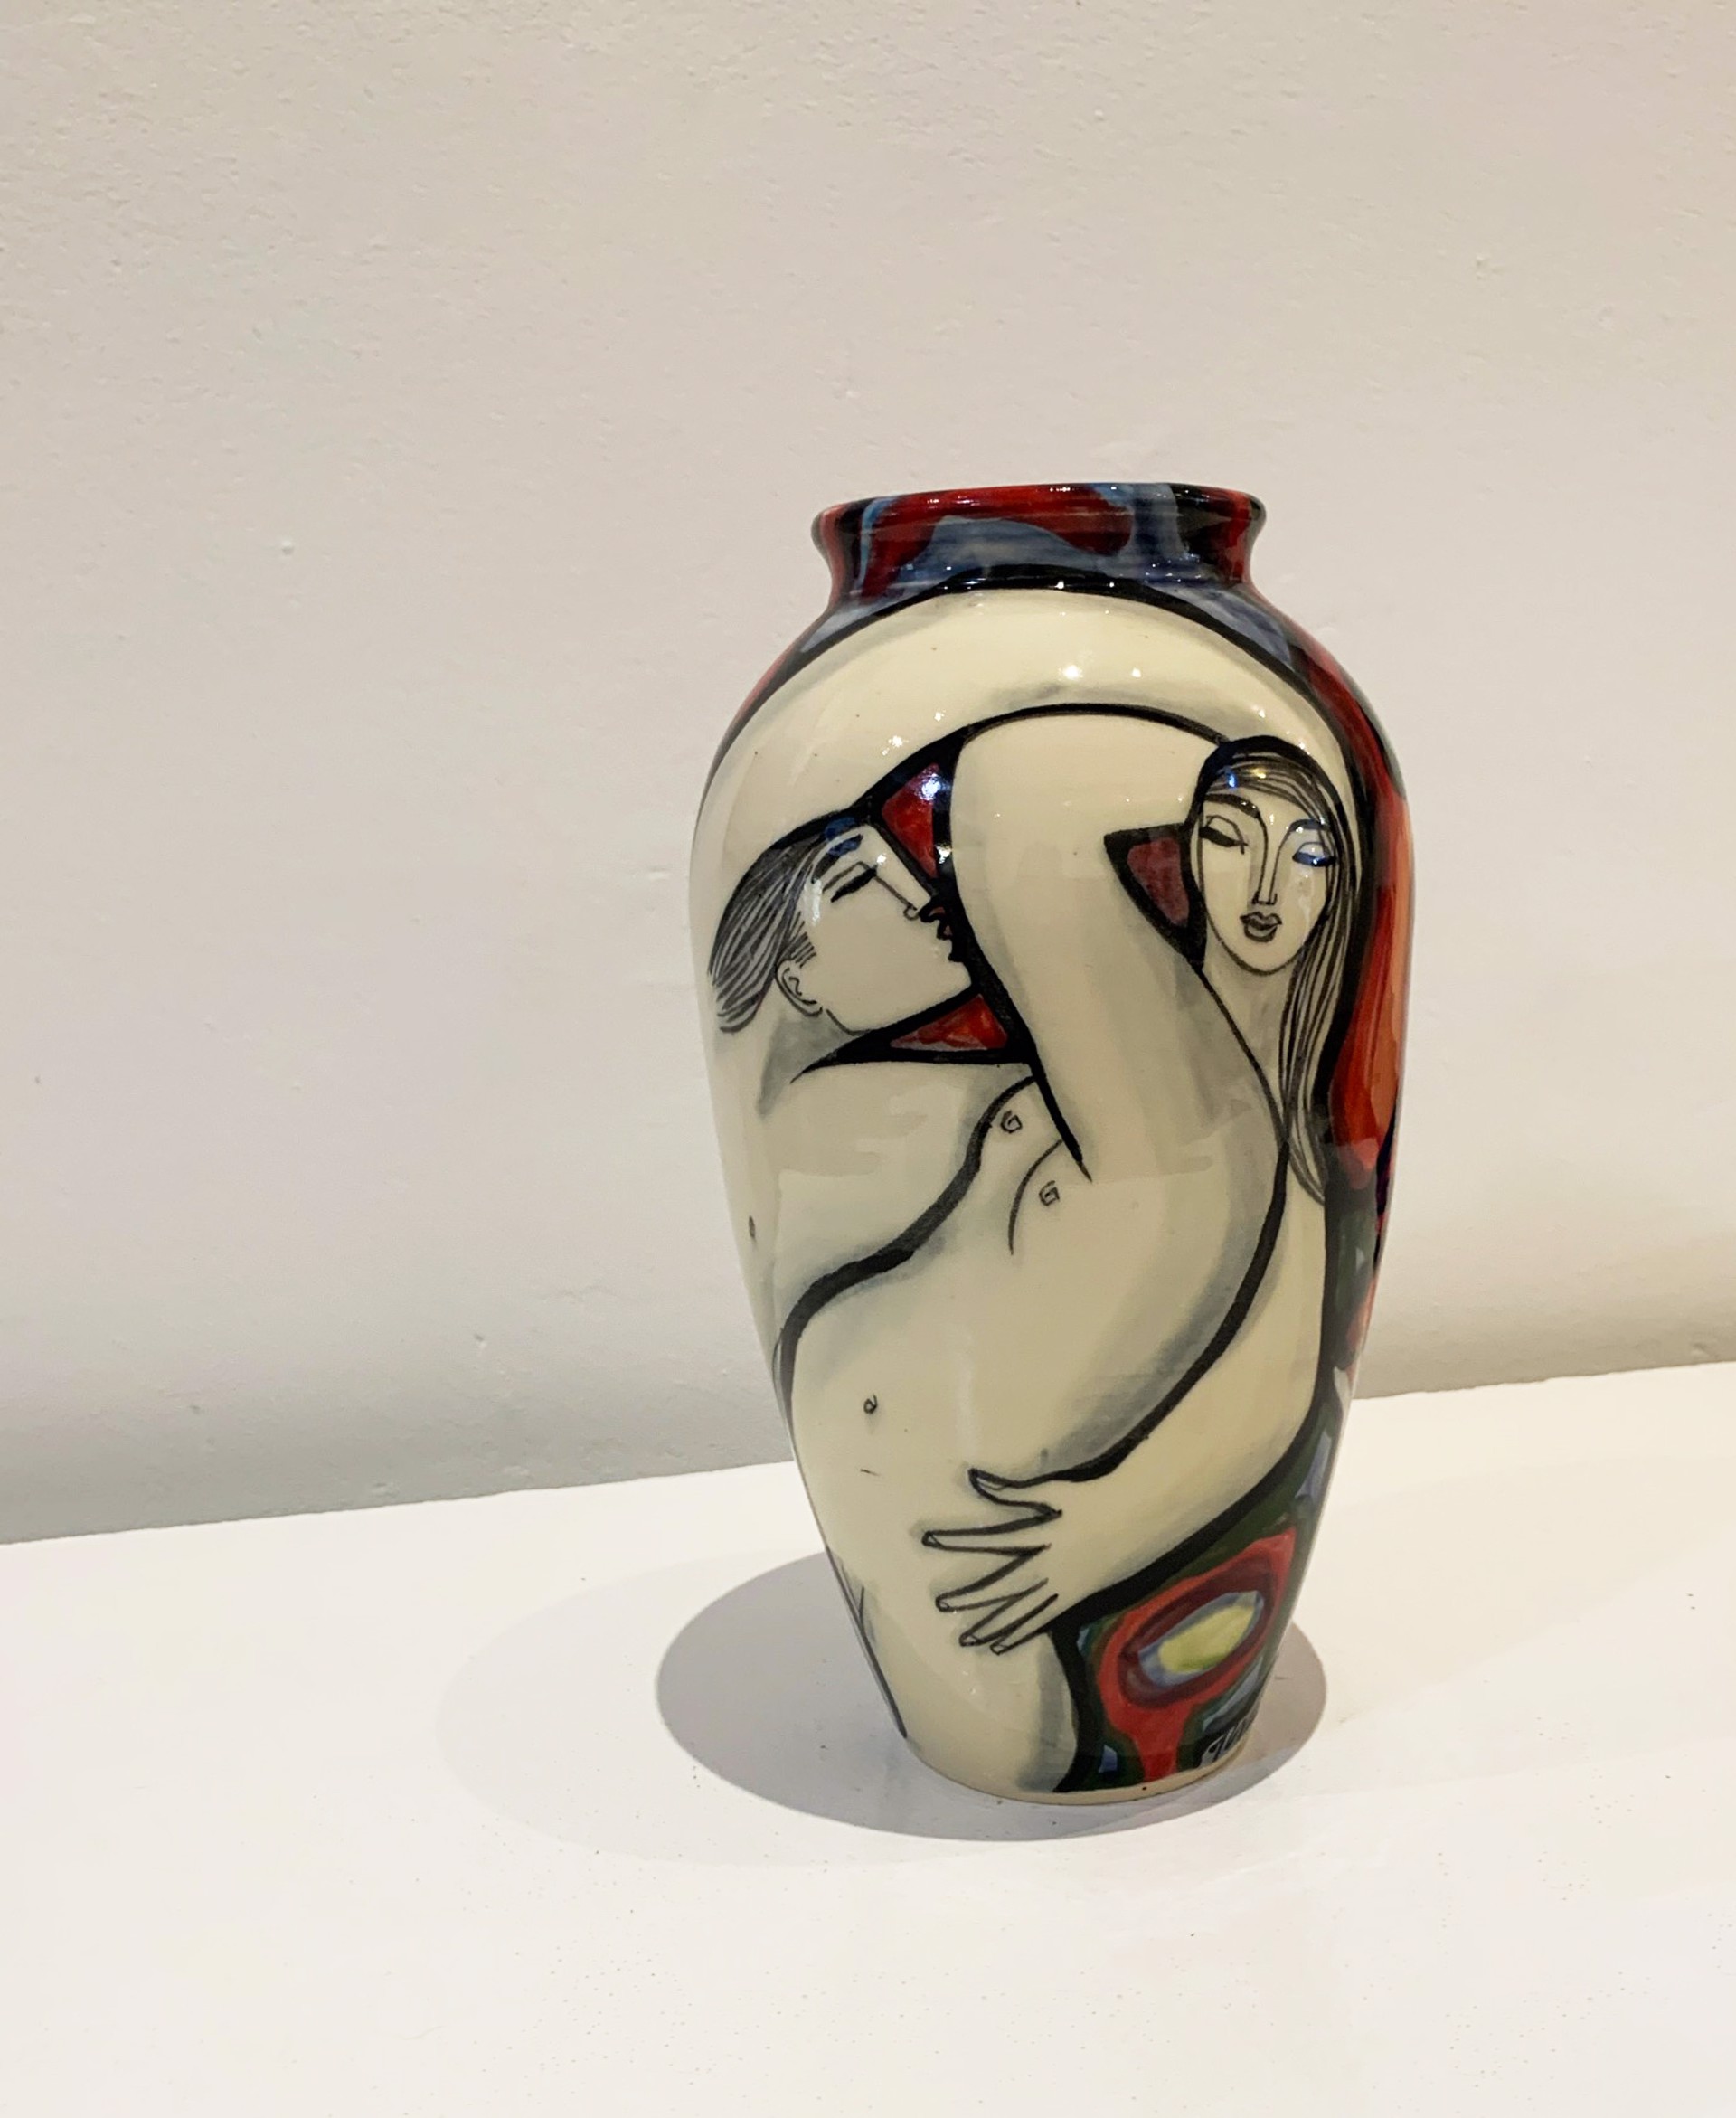 Vase #19 by Ken and Tina Riesterer